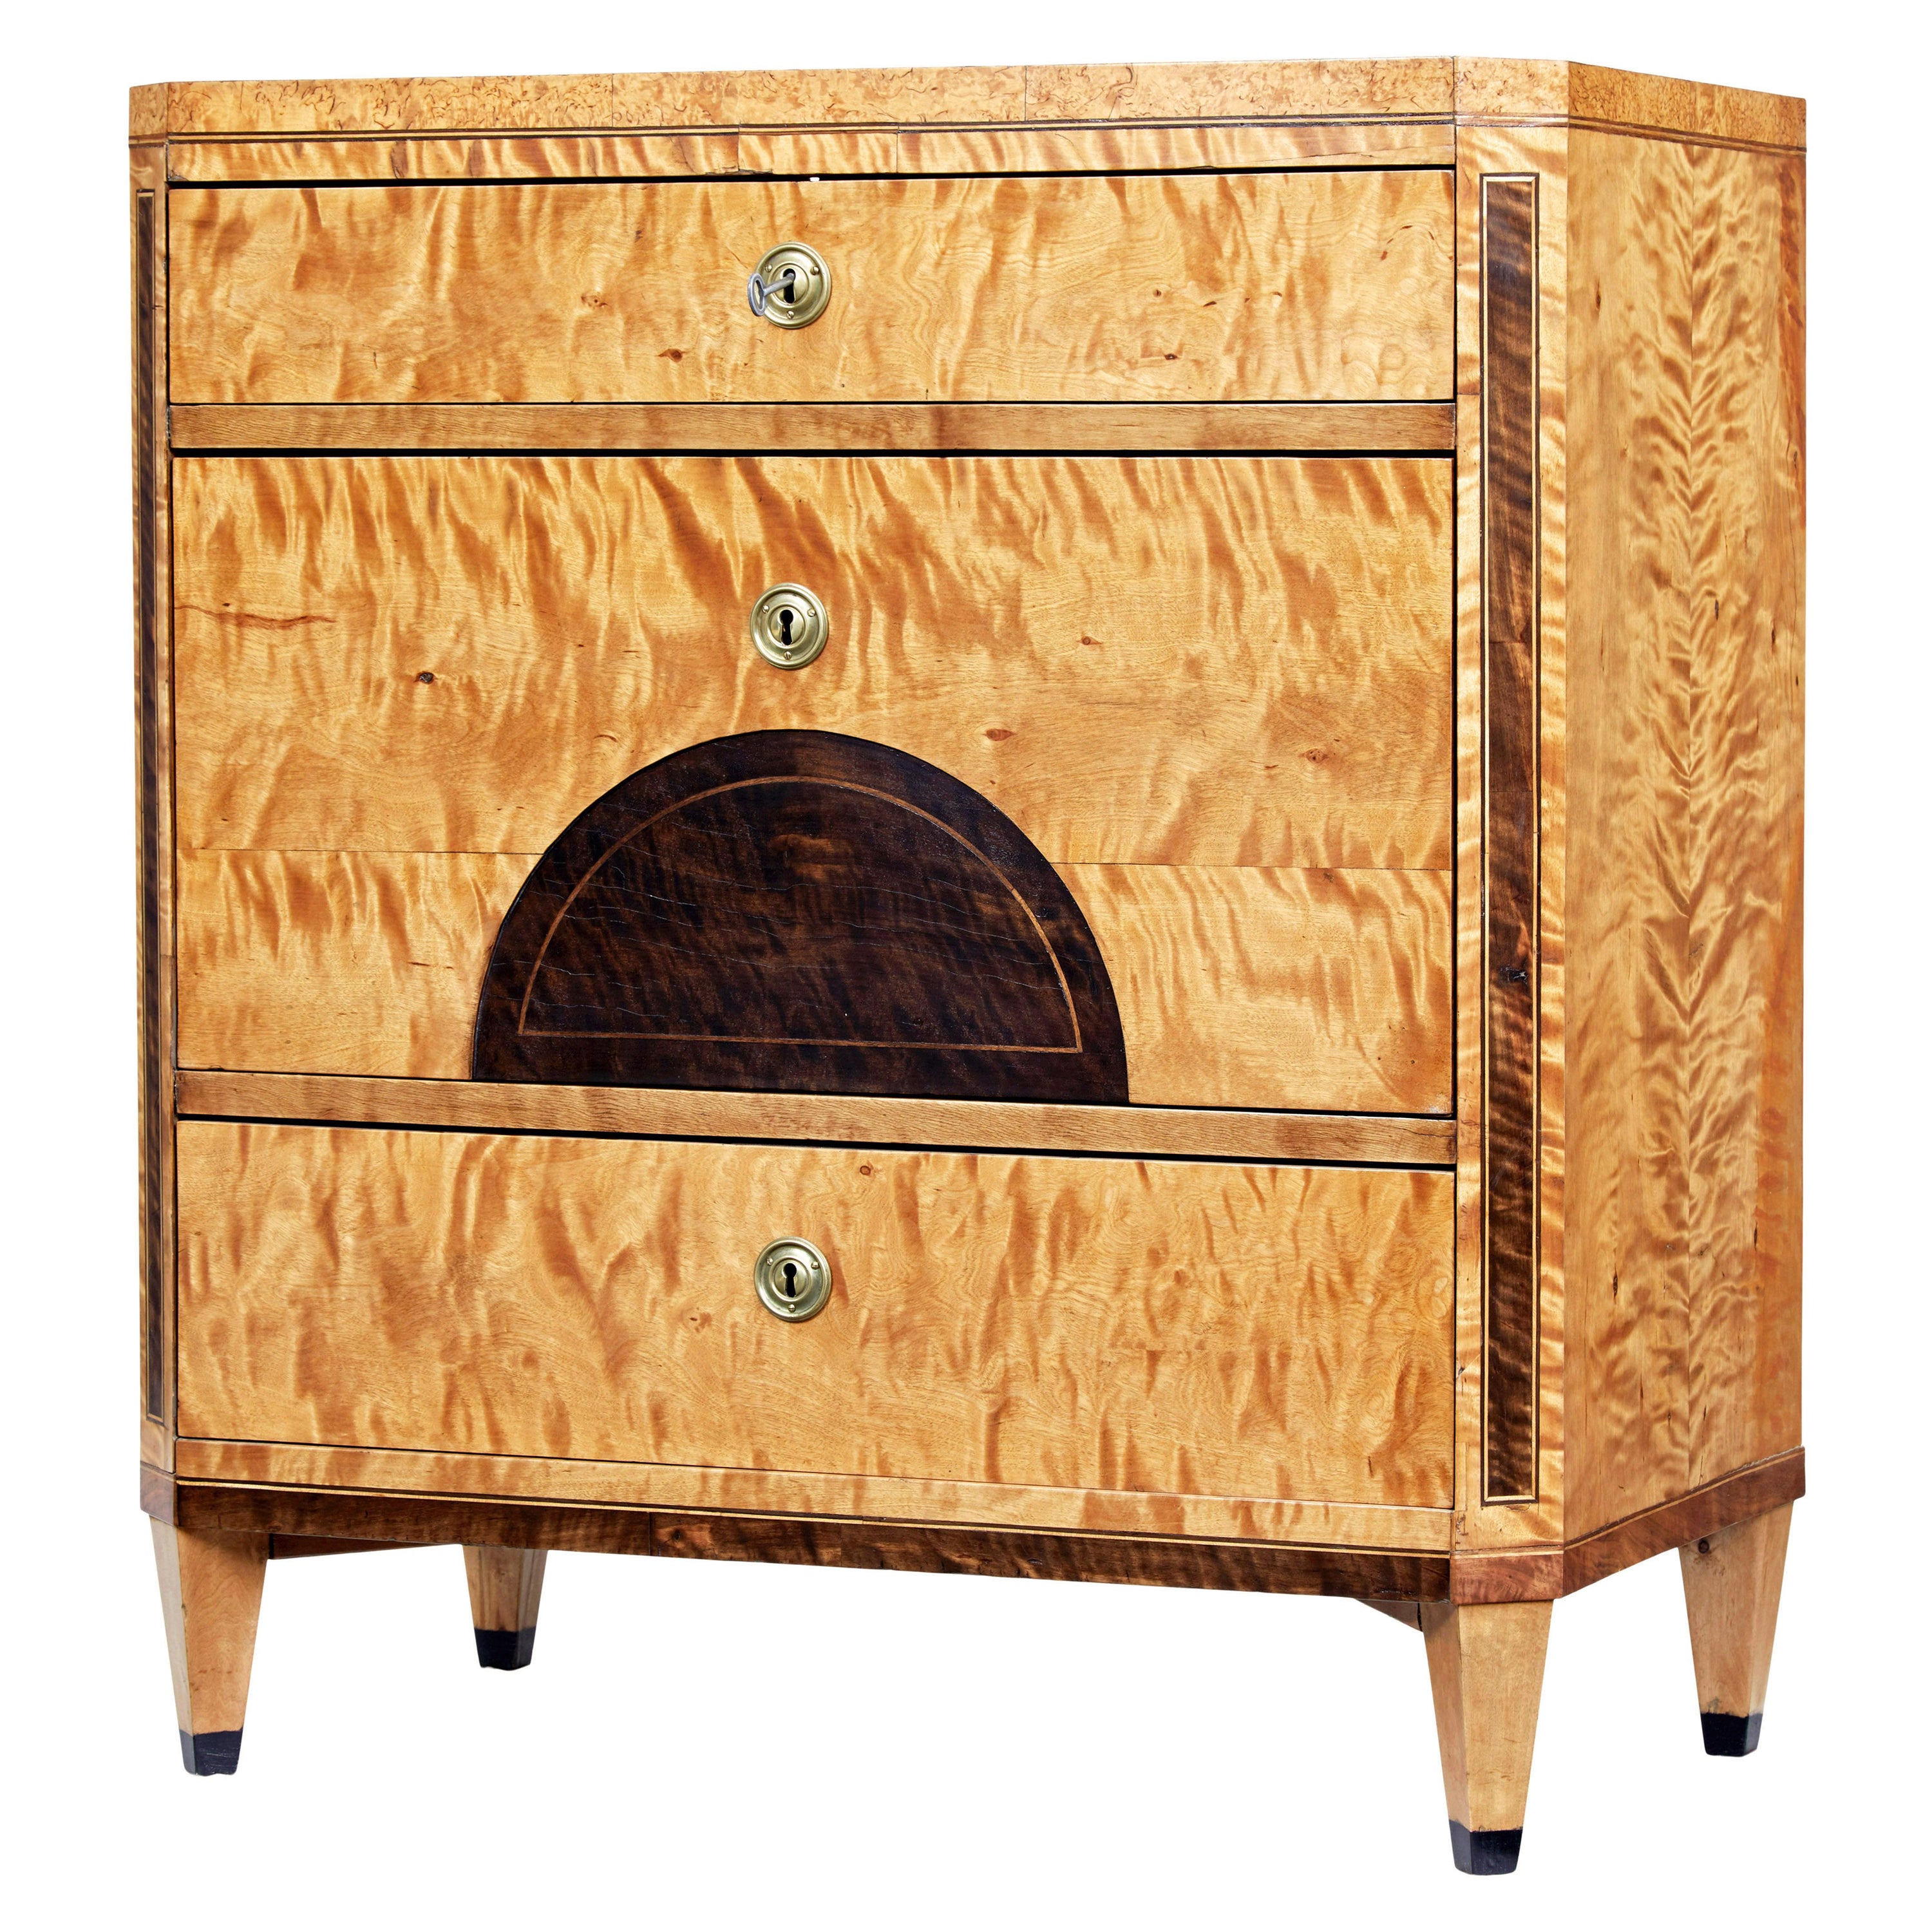 Swedish 19th century inlaid birch chest of drawers For Sale